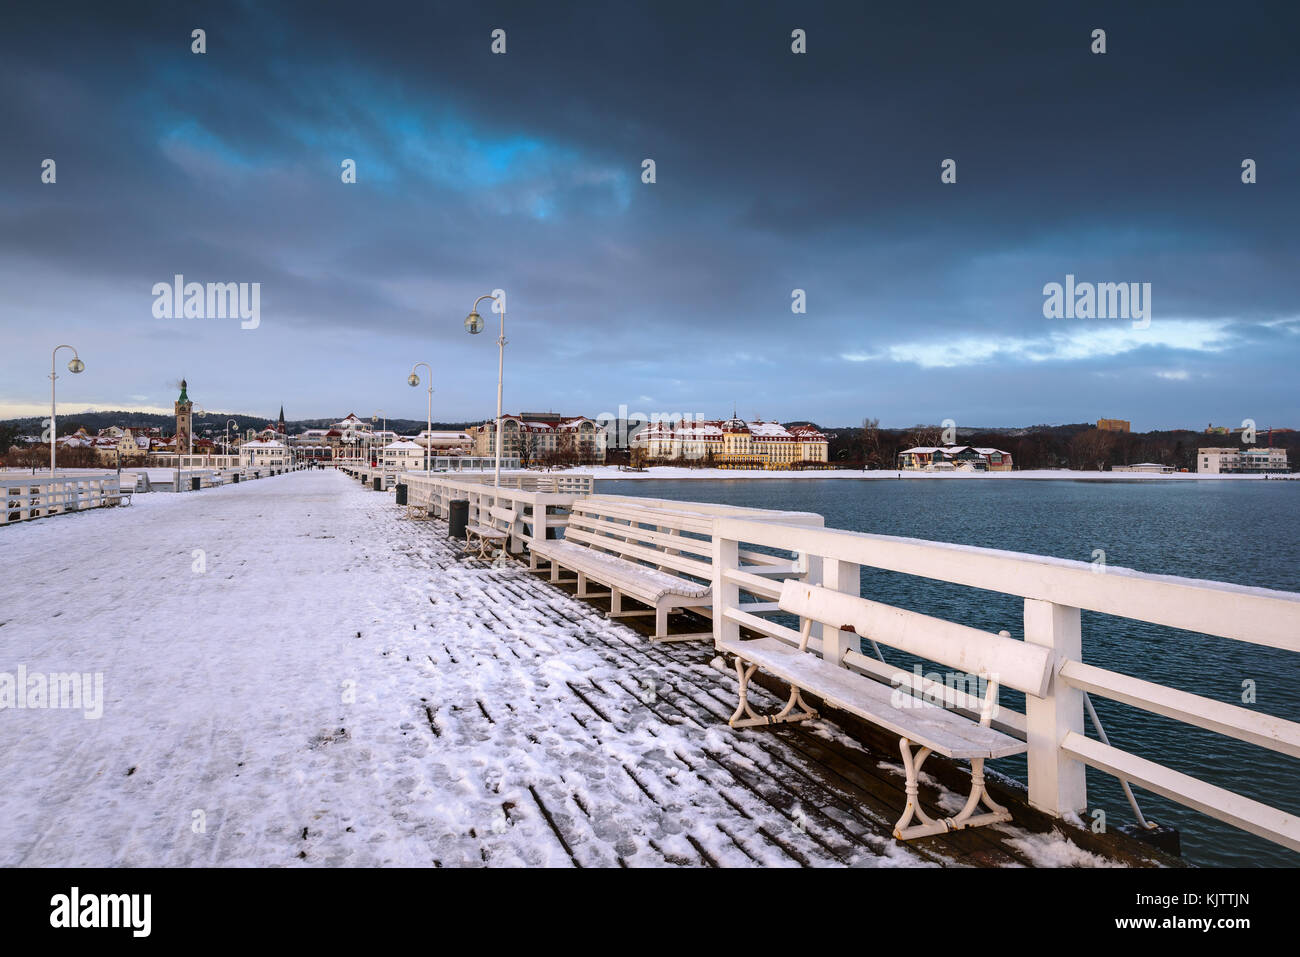 Early morning at snow covered pier in Sopot. Winter landscape. Poland. Stock Photo